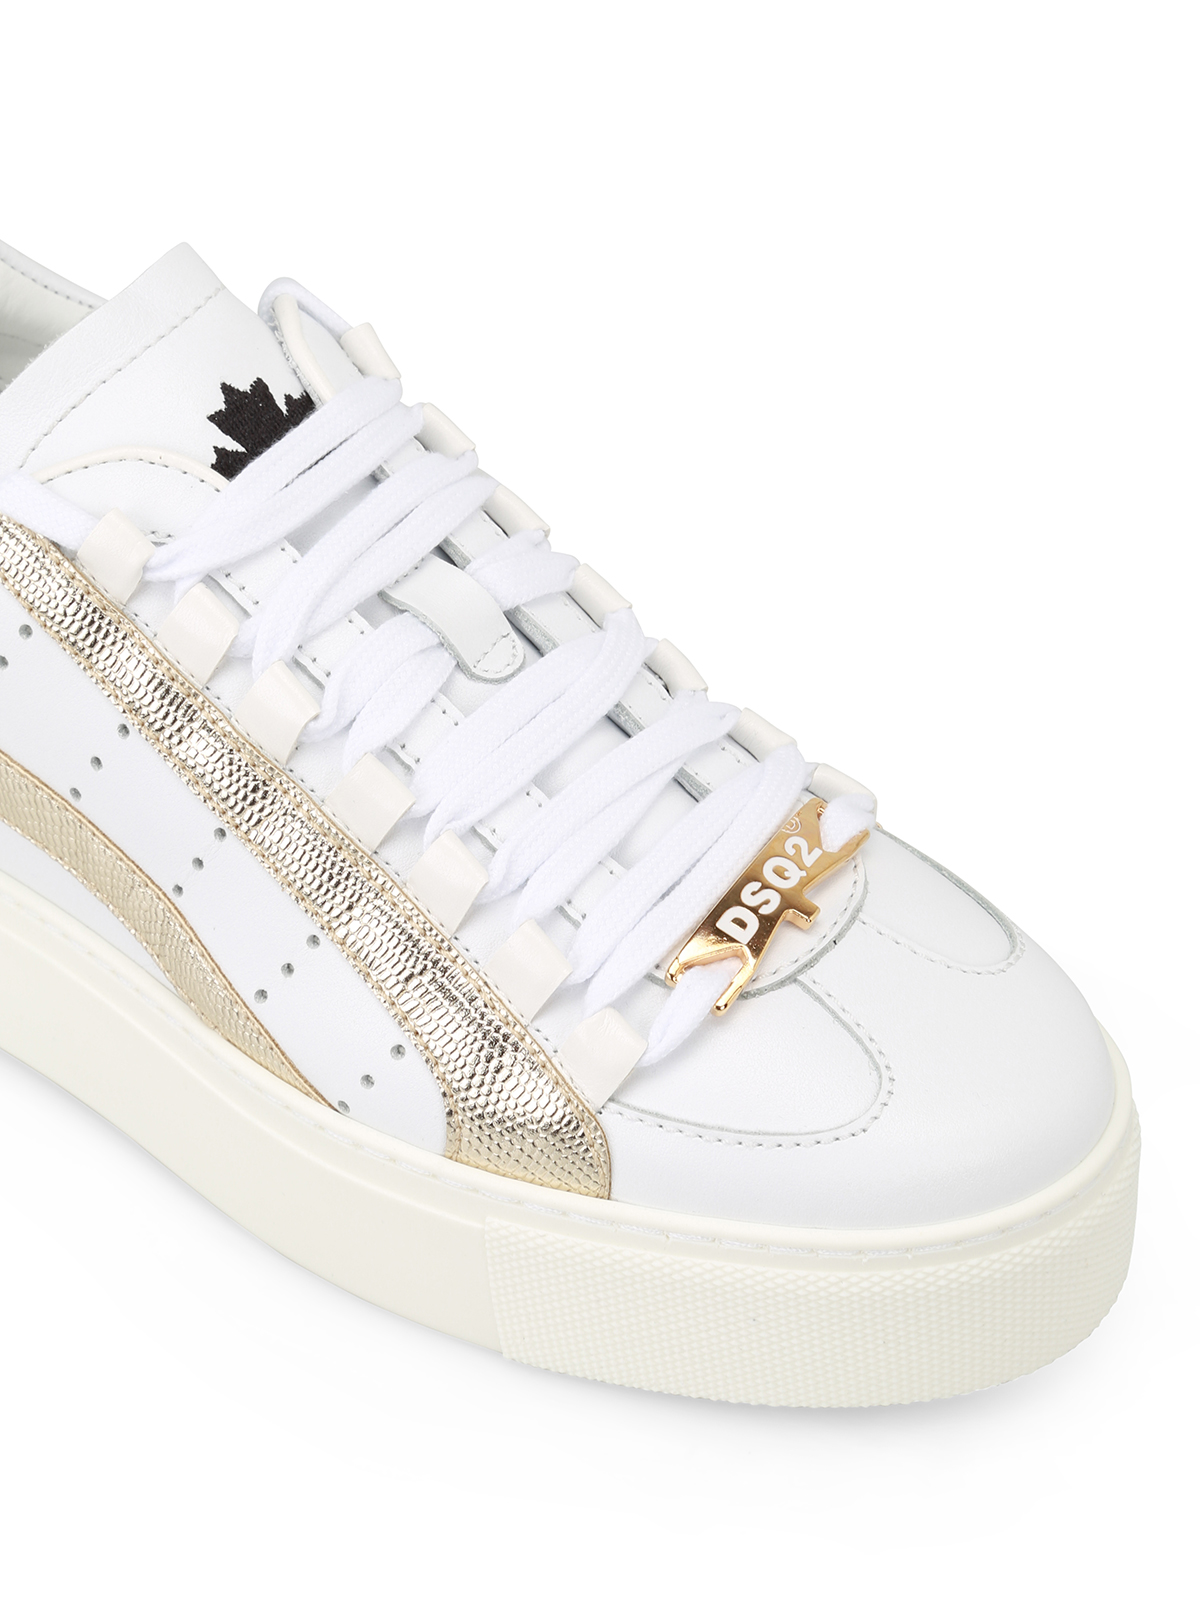 Trainers Dsquared2 - white and gold sneakers - SNW000310650001M517